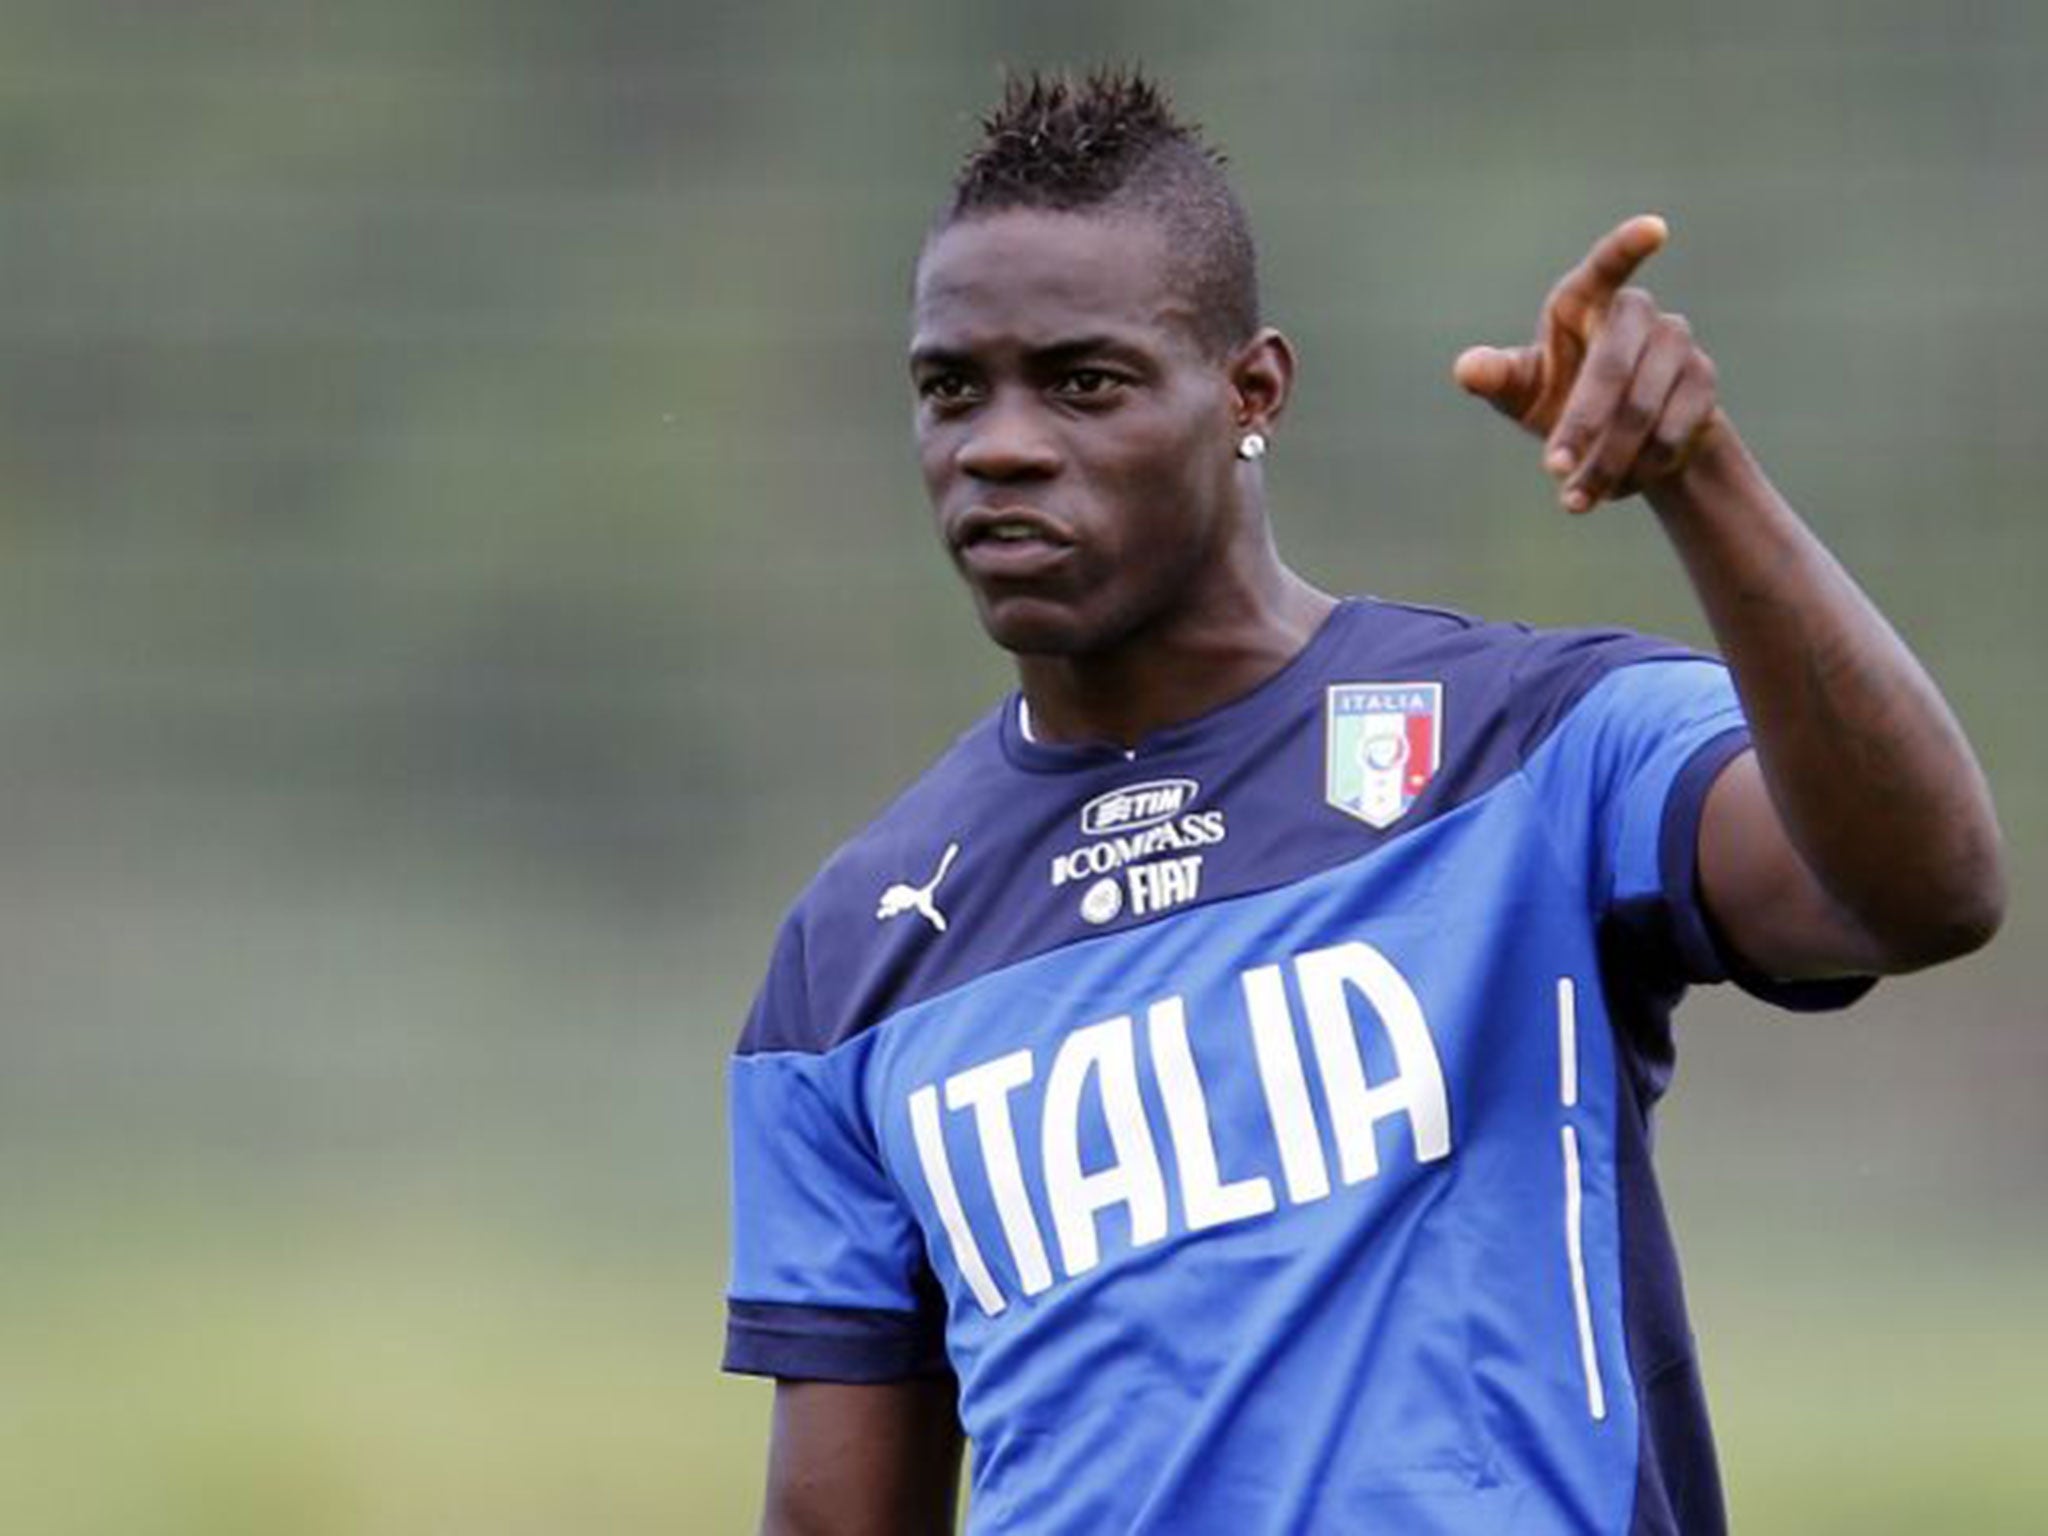 Mario Balotelli came on as a substitute for Ciro Immobile after an hour but failed to score (Reuters)